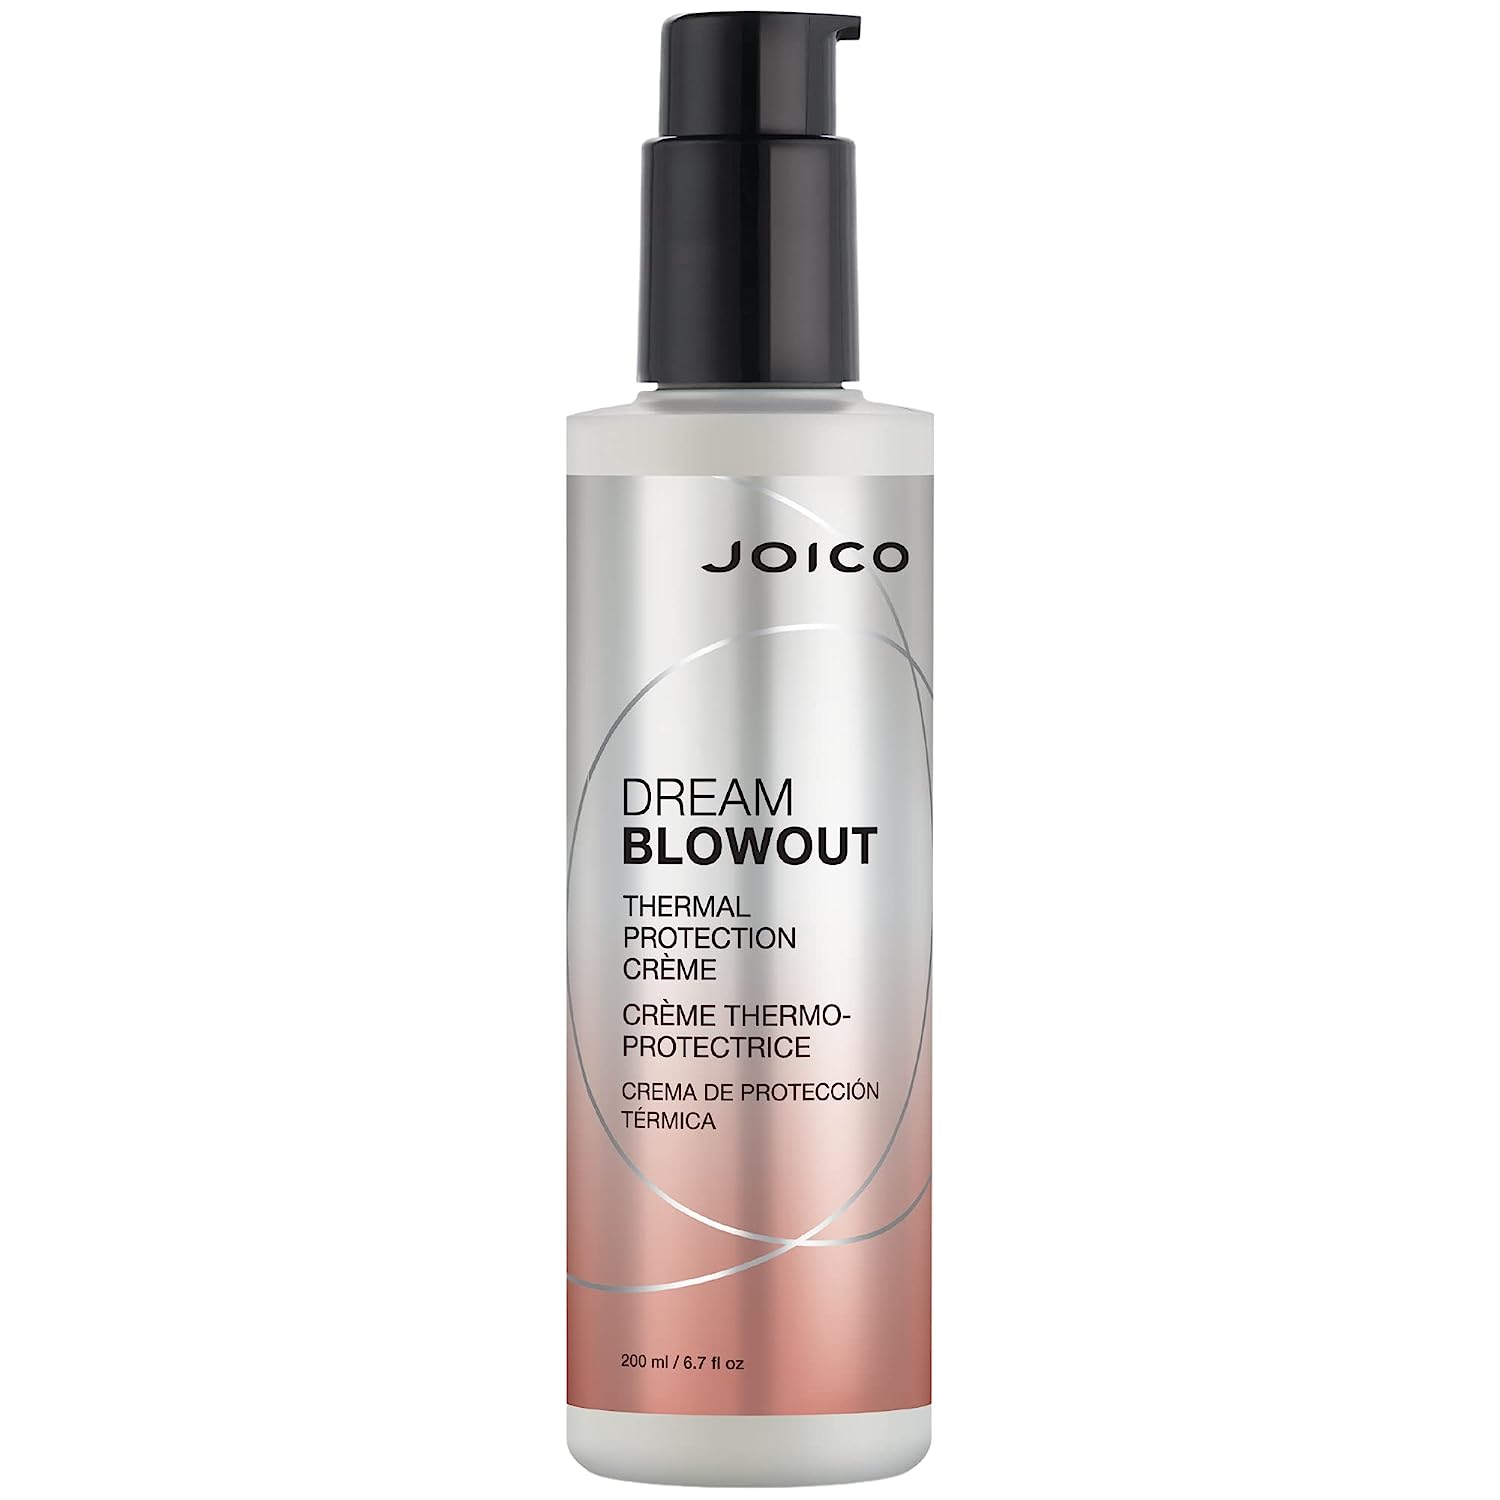 Joico Dream Blowout Thermal Protection Crème | For [...]